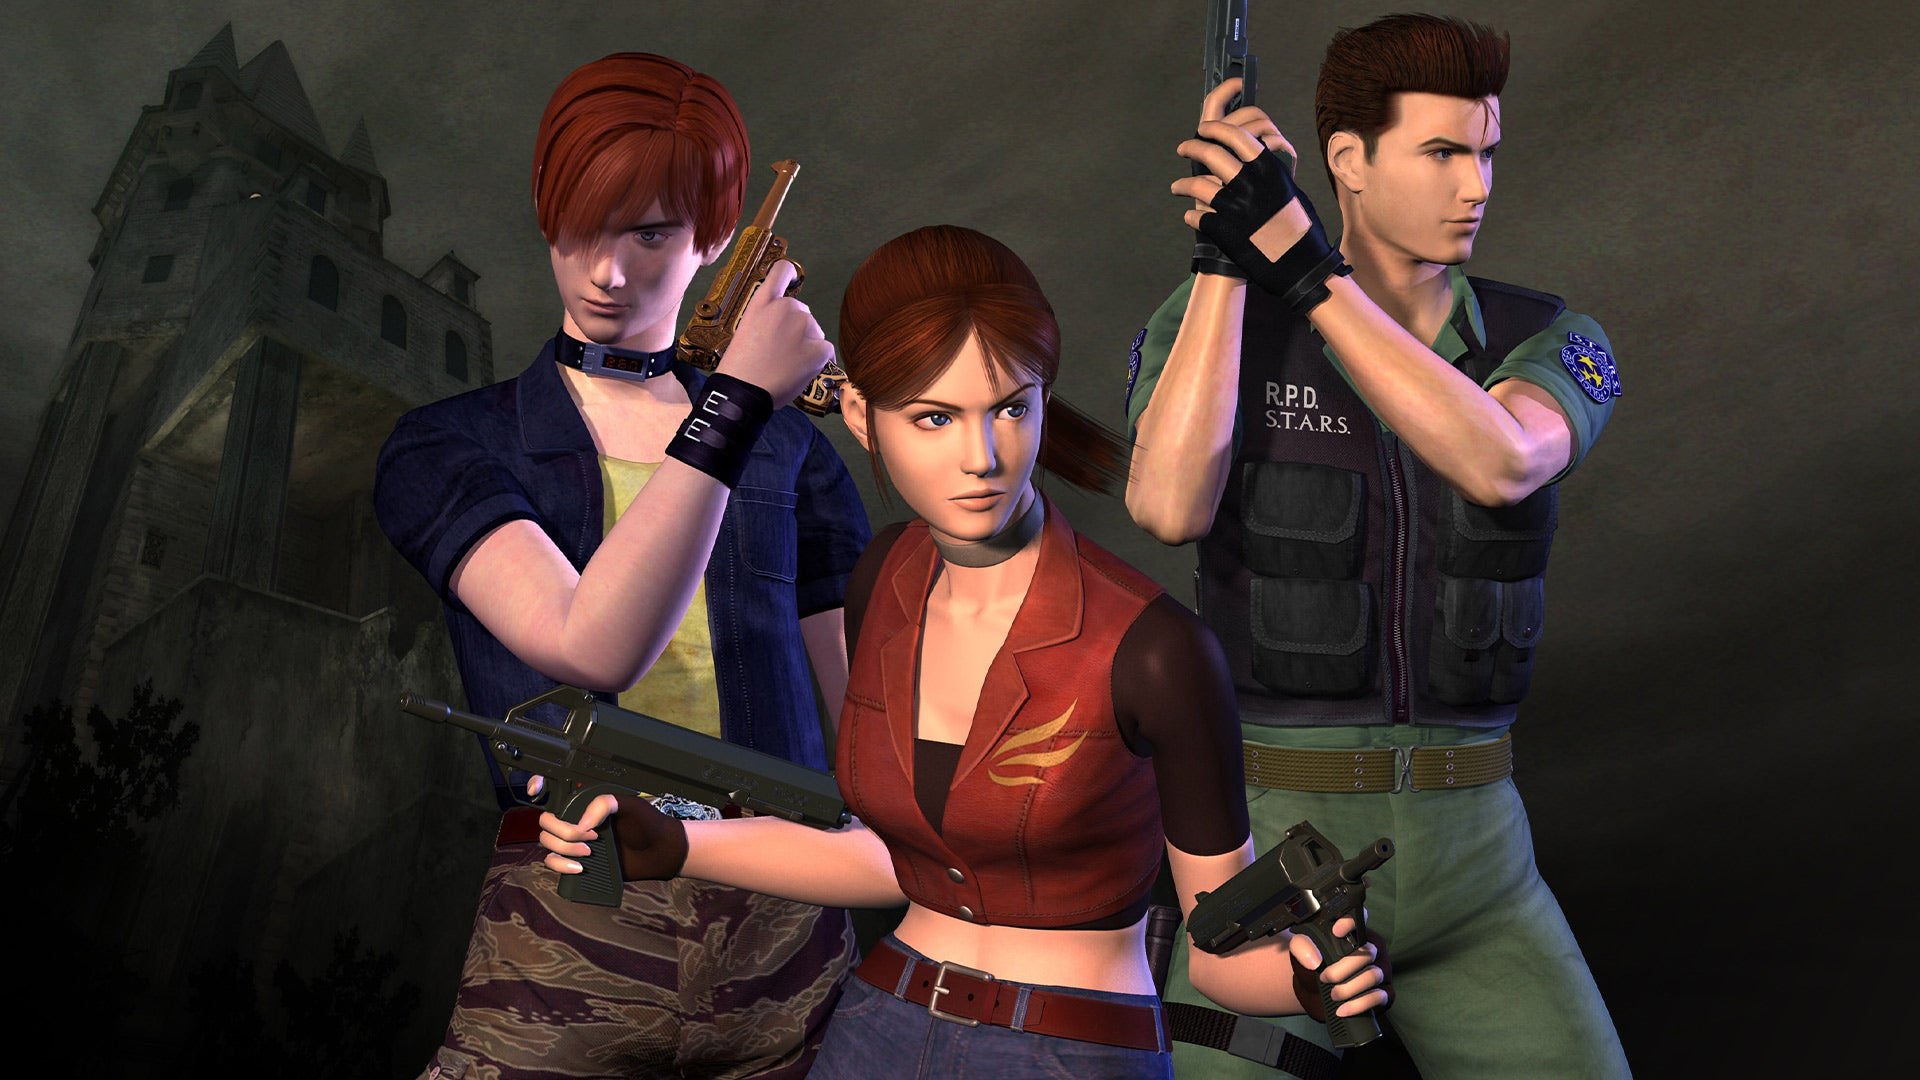 Resident Evil: Code Veronica characters.